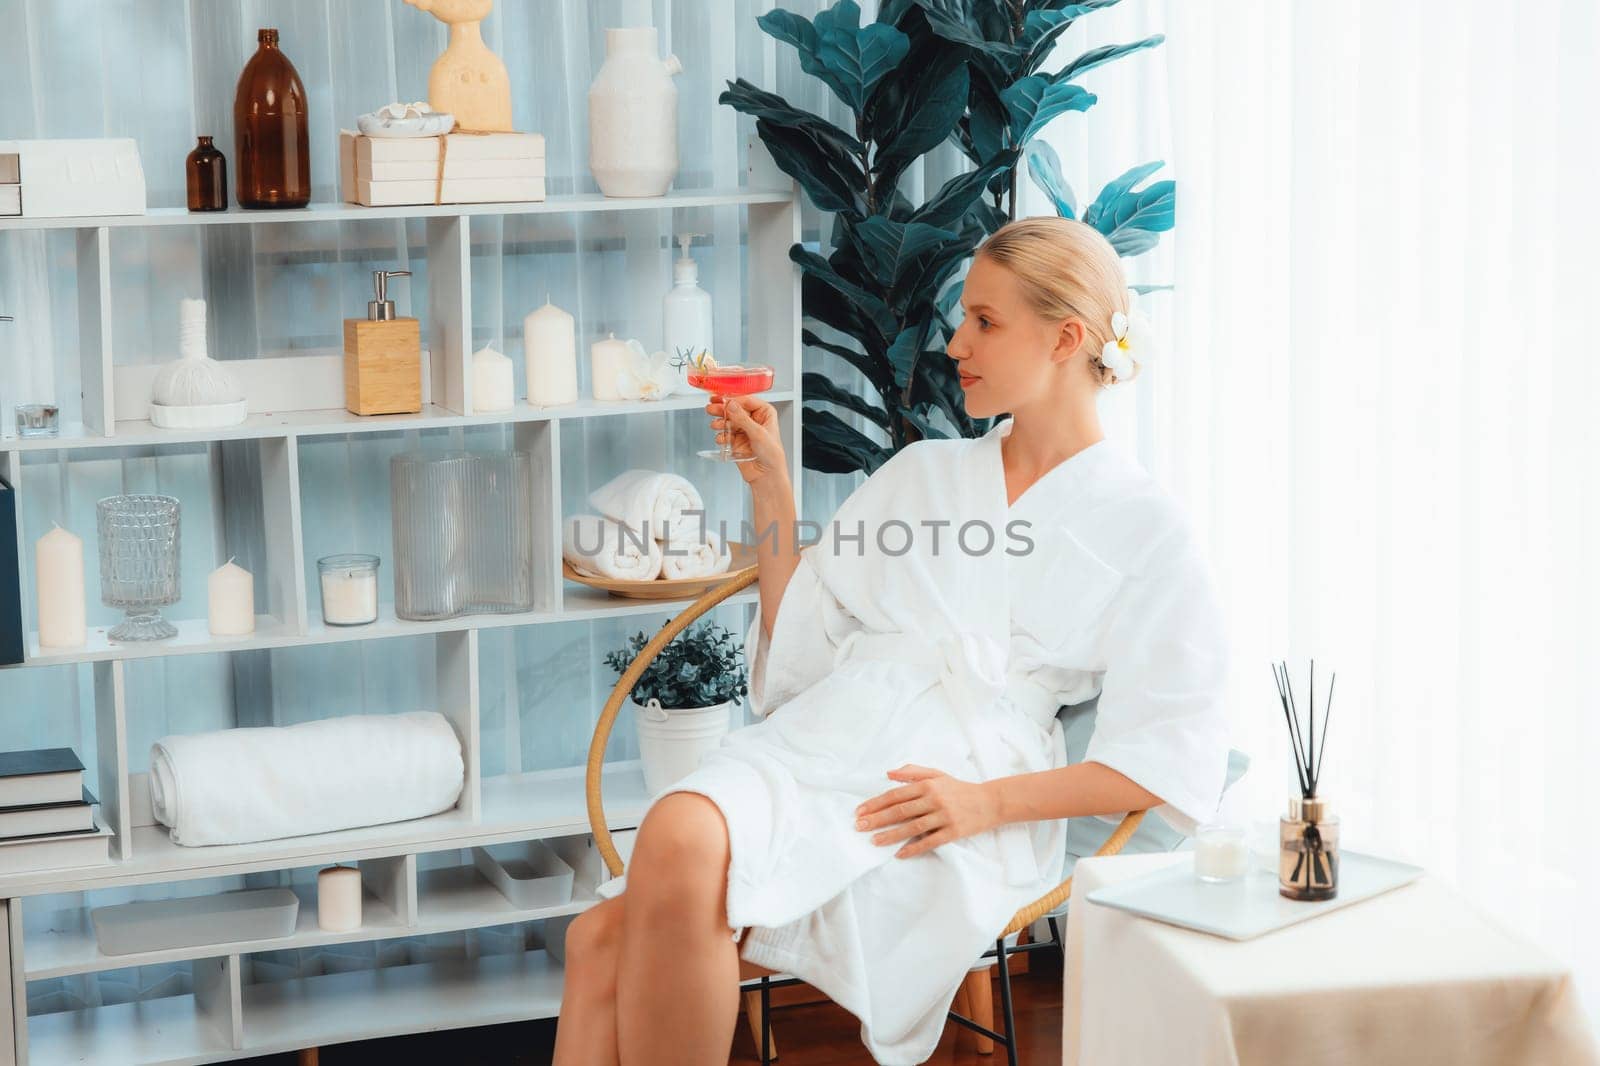 Couple wearing bathrobe relaxing with drinks in luxurious hotel spa. Quiescent by biancoblue